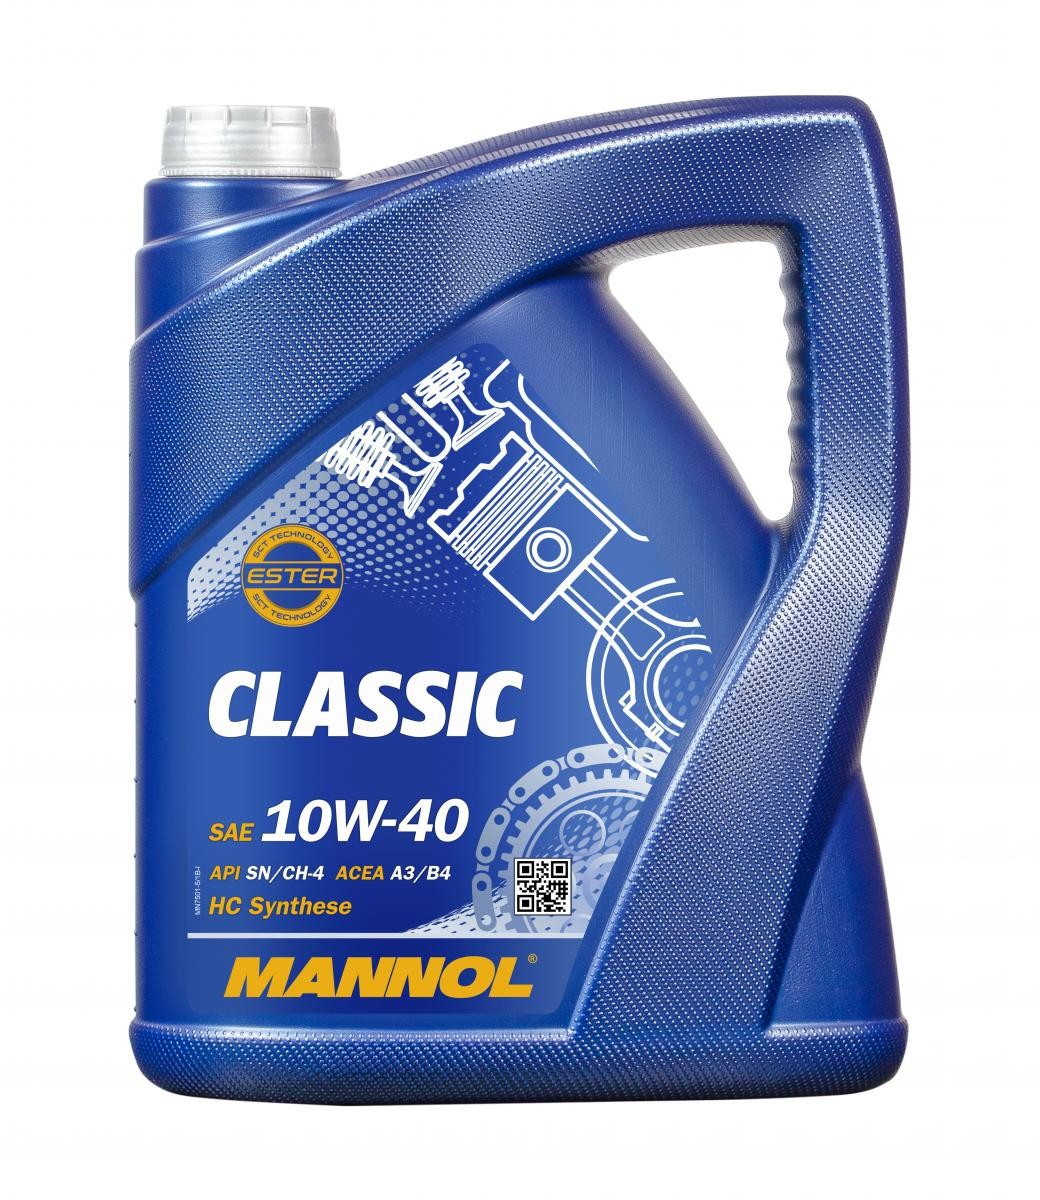 MANNOL ContiClassic MN7501-5 Engine oil 10W-40, 5l, Part Synthetic Oil